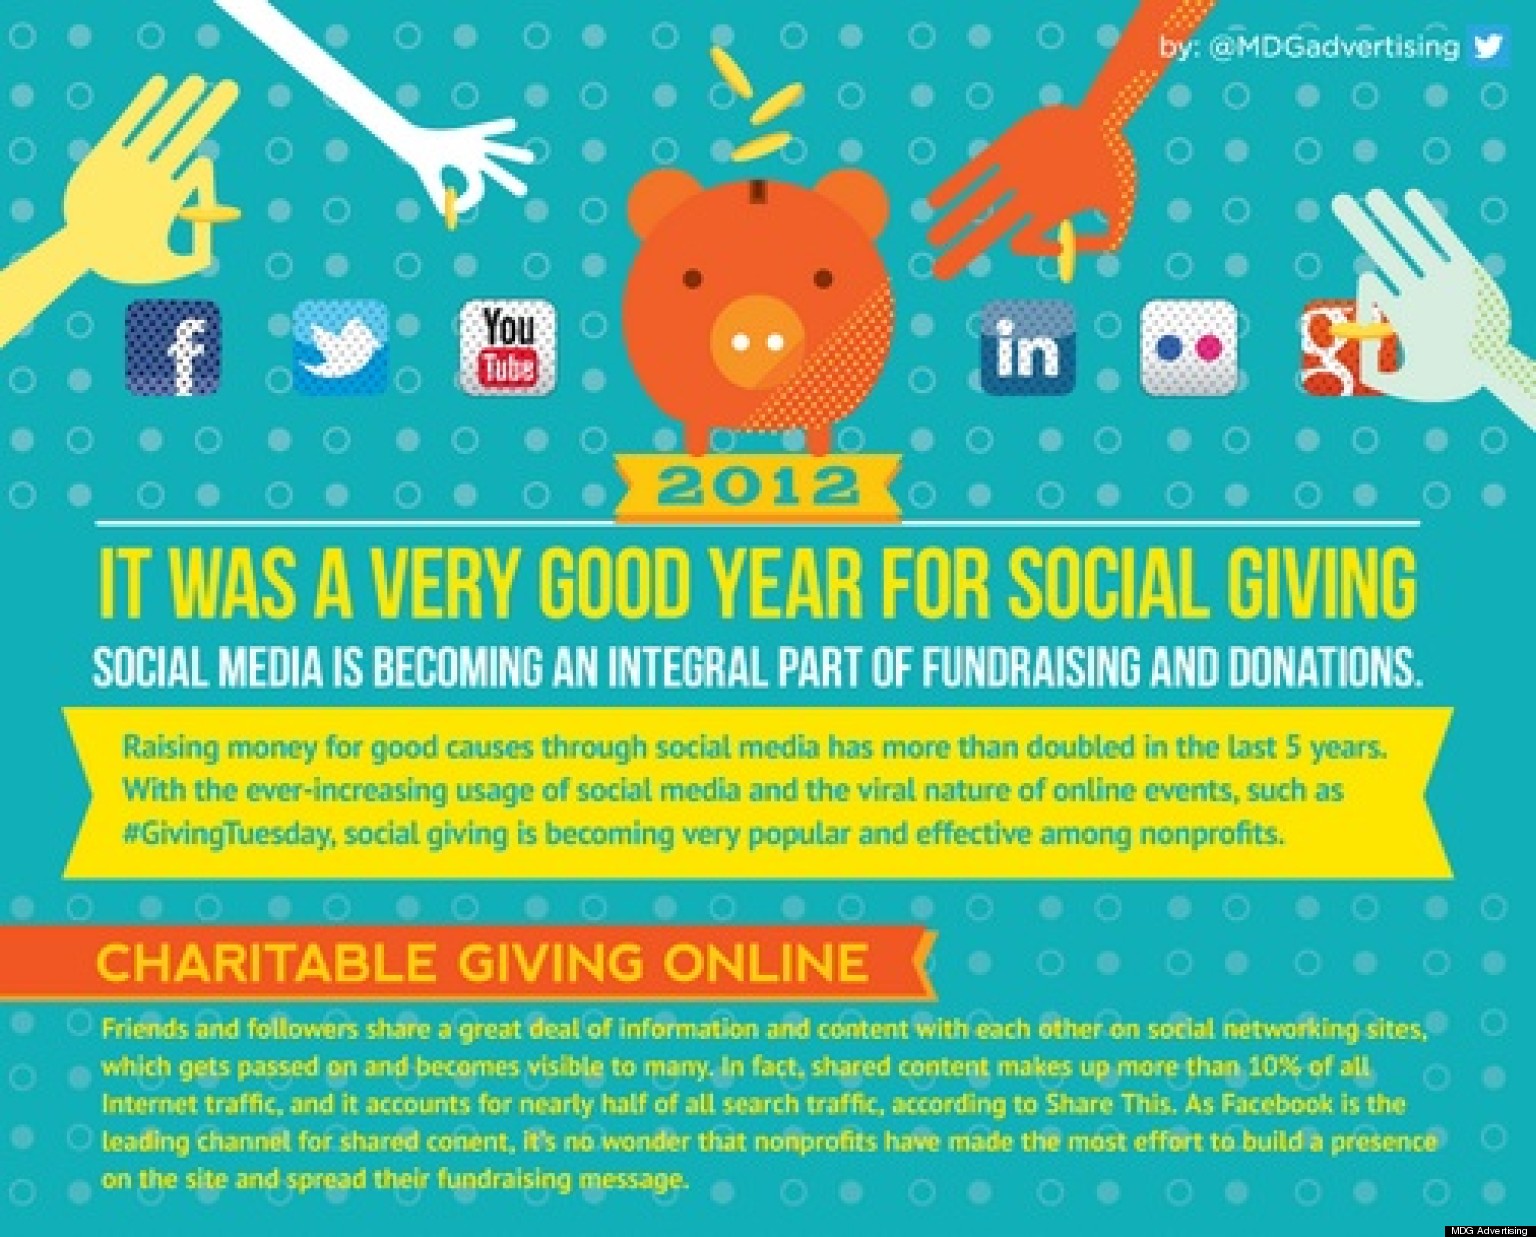 How Nonprofits Used Social Media To Increase Giving In 2012